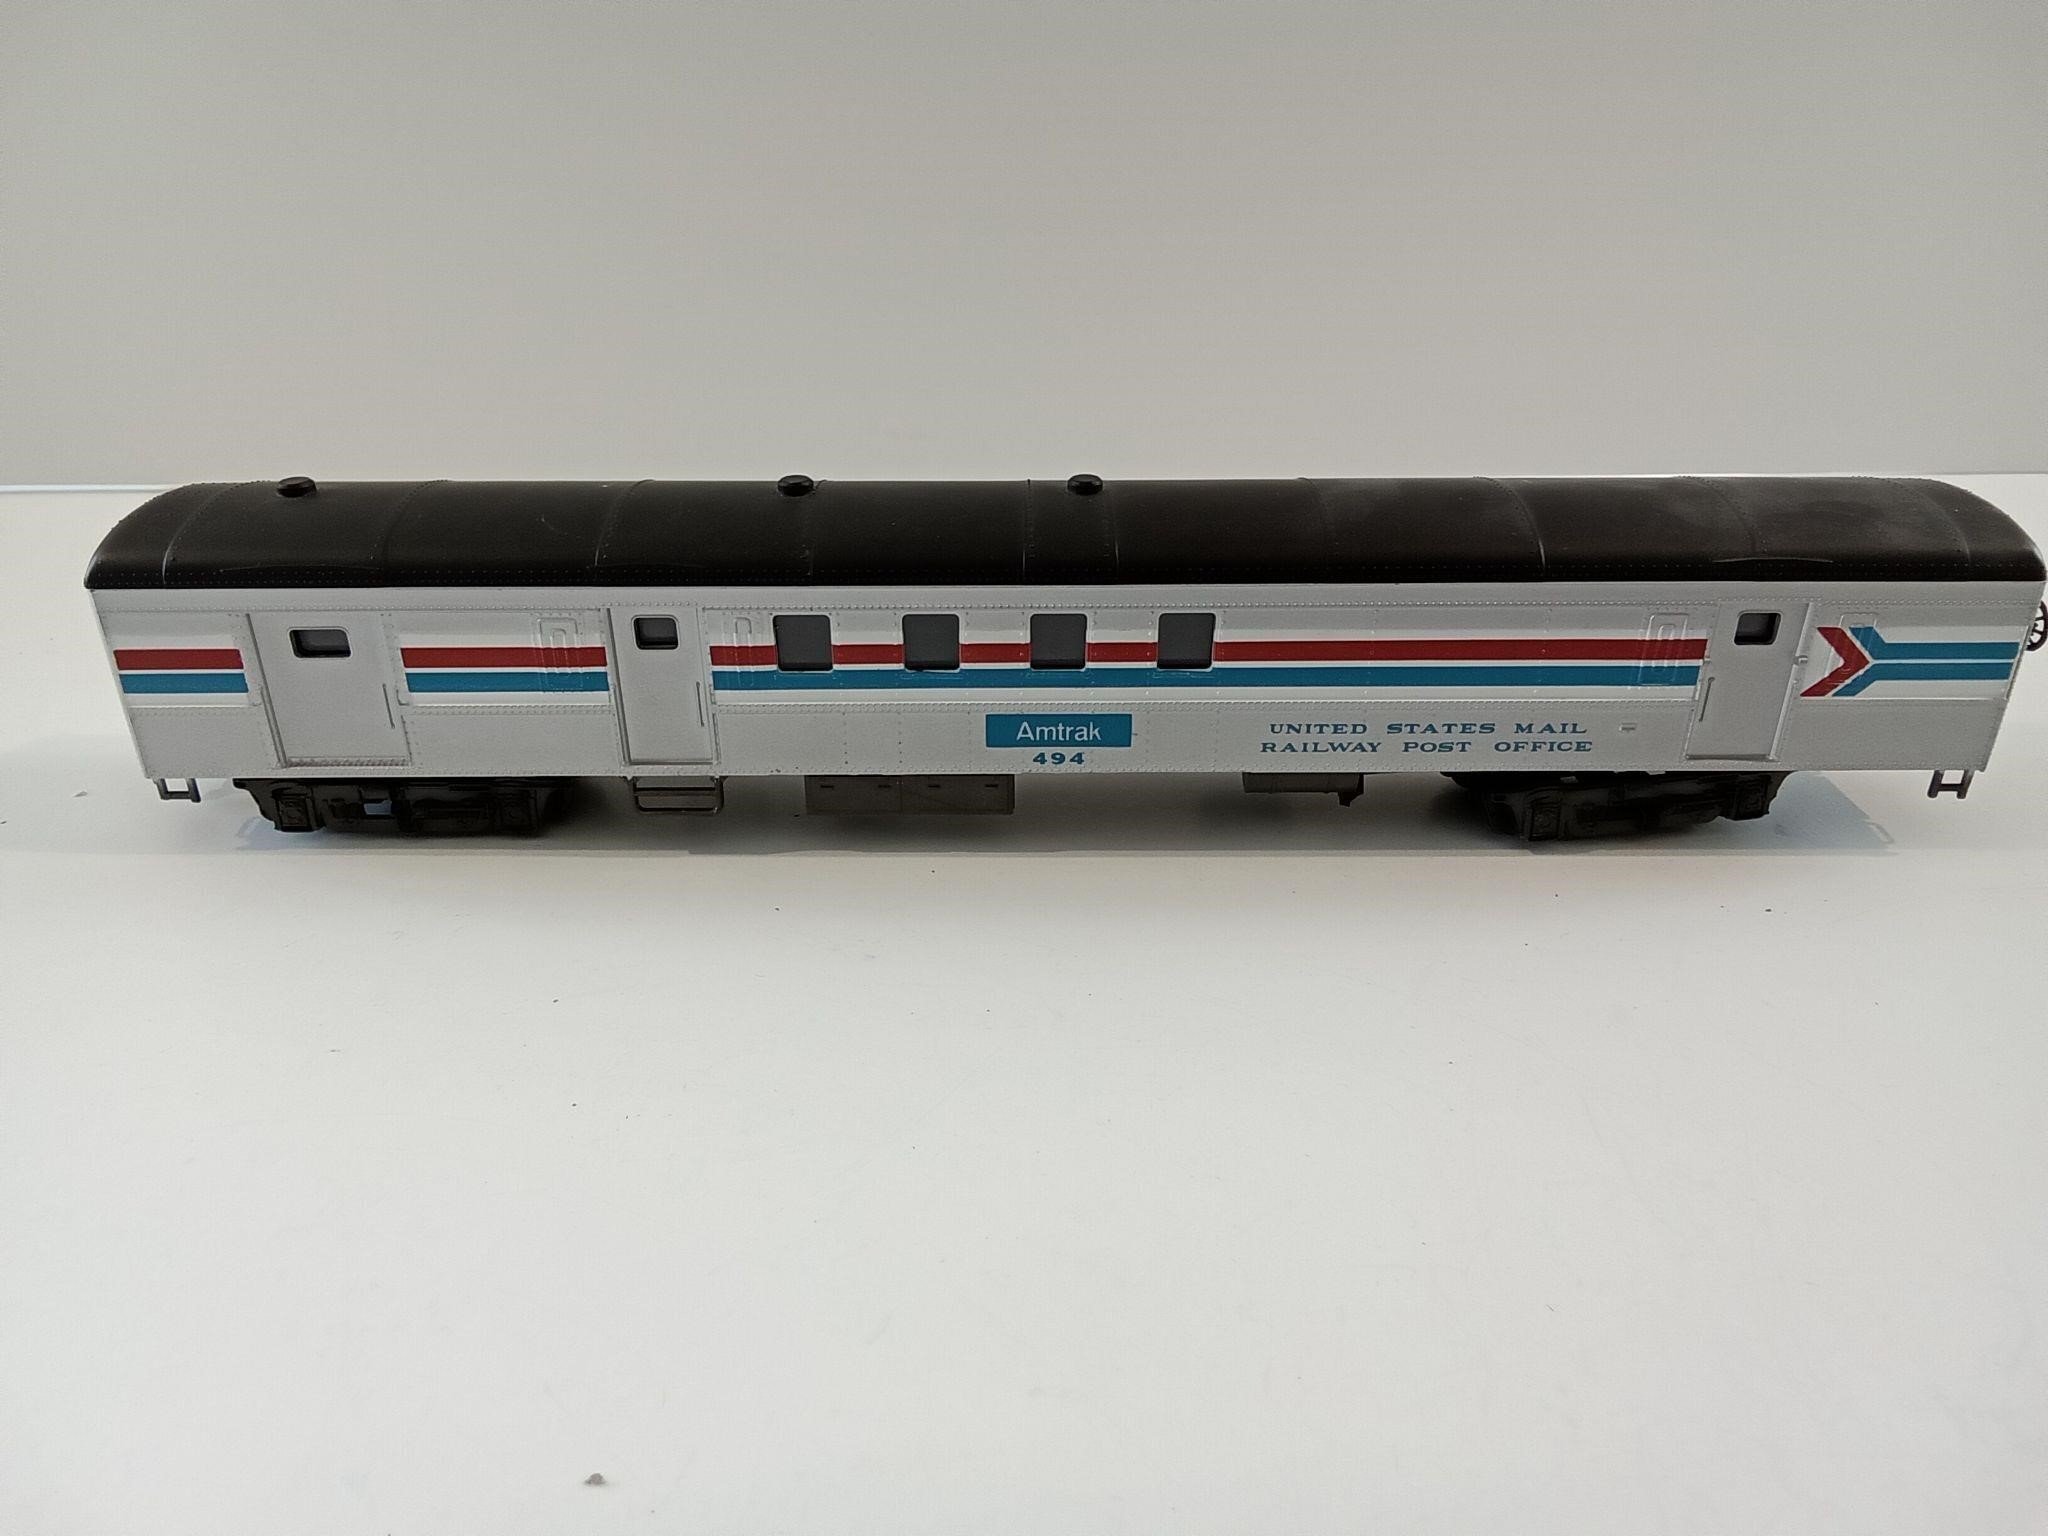 Amtrak Passenger Train with Mail Car and Cargo Car